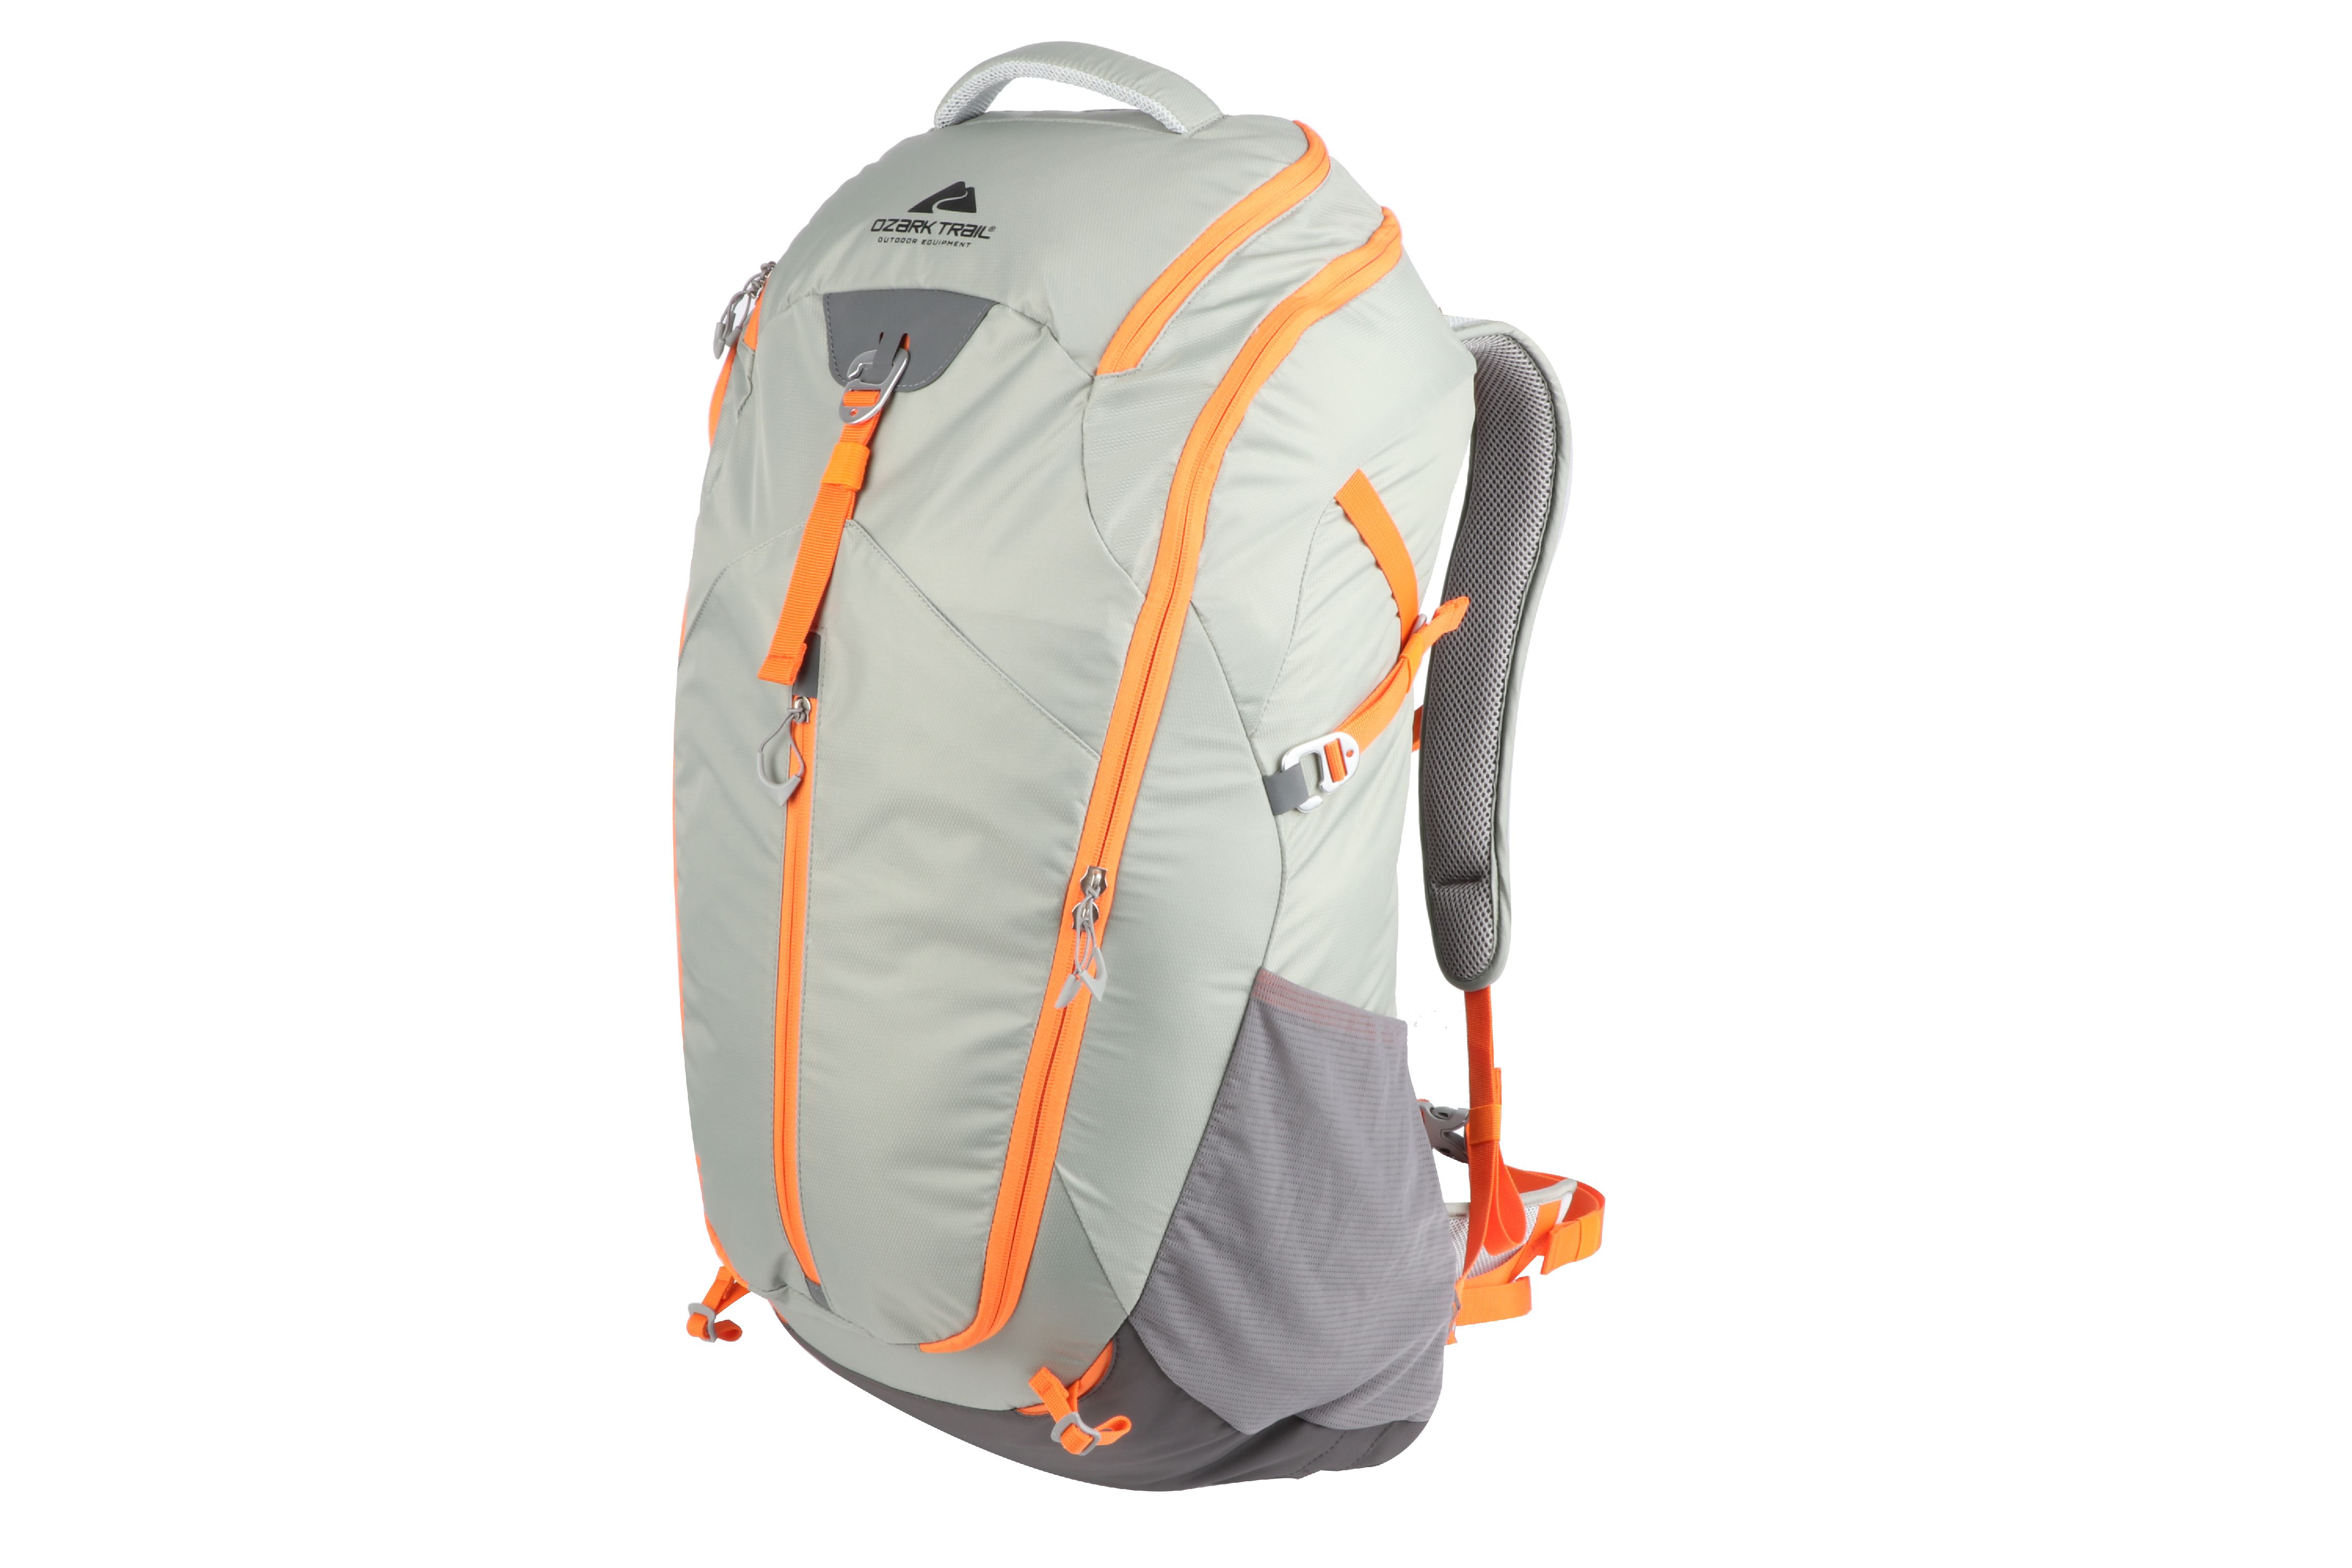 Ozark Trail 40L Lightweight Hiking Backpack Deals, Coupons & Reviews